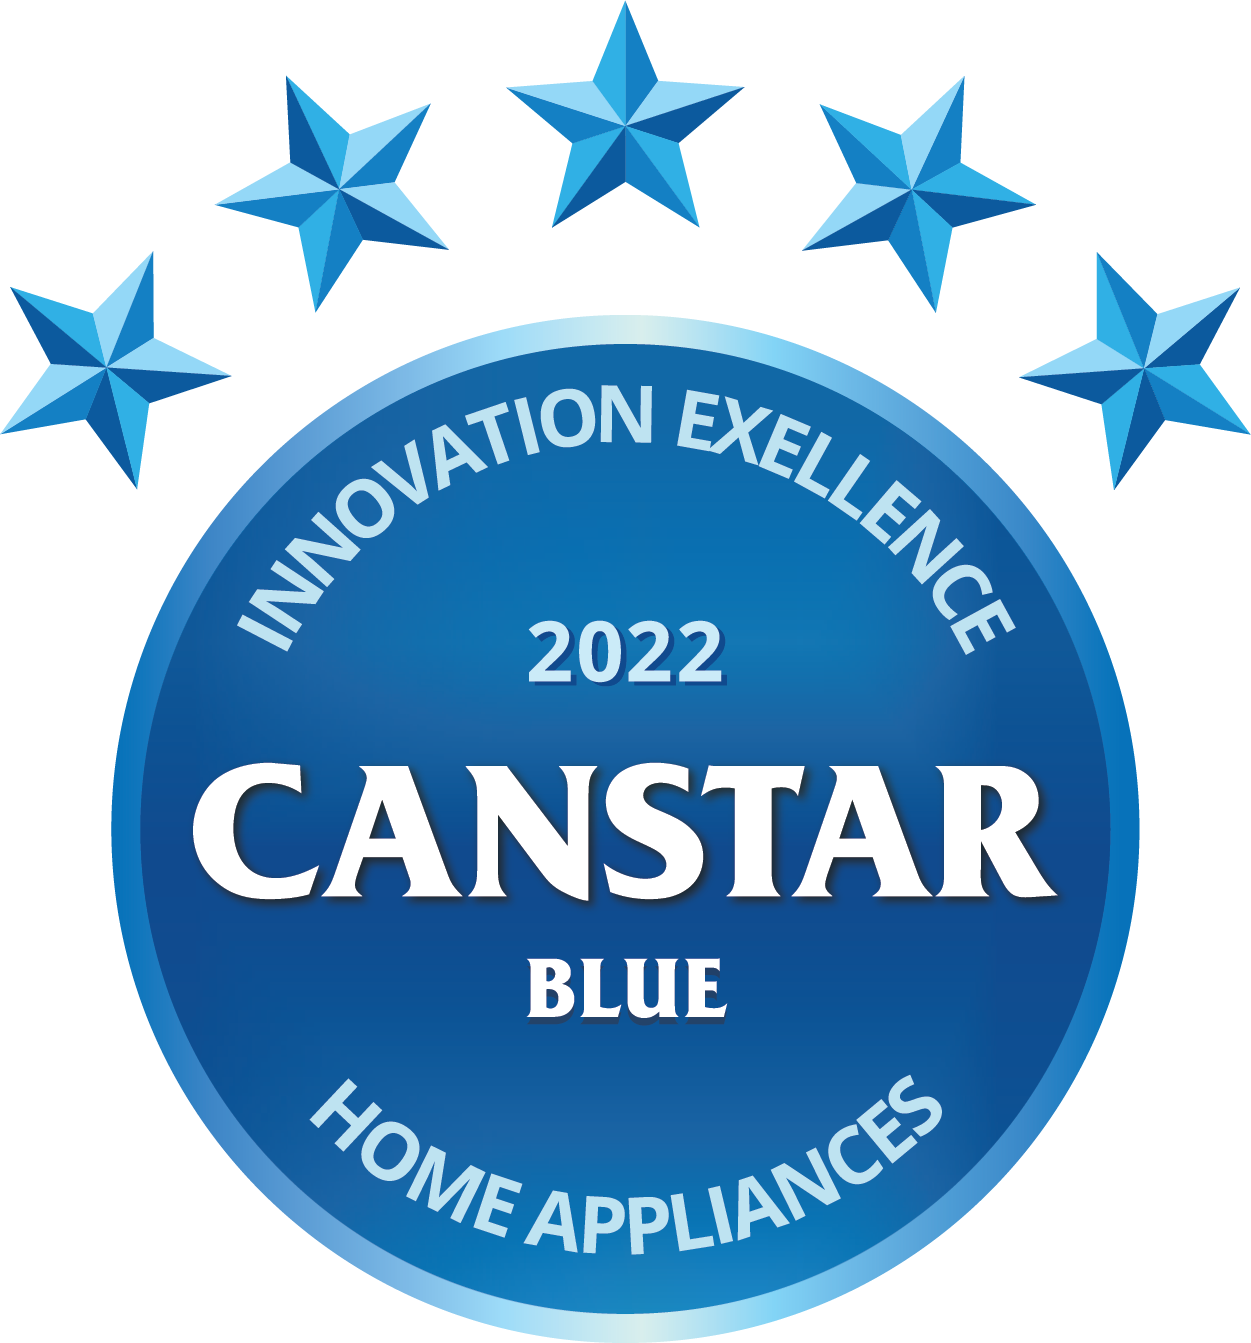  CANSTAR Blue Innovation & Excellence Award 2022 Home Appliances